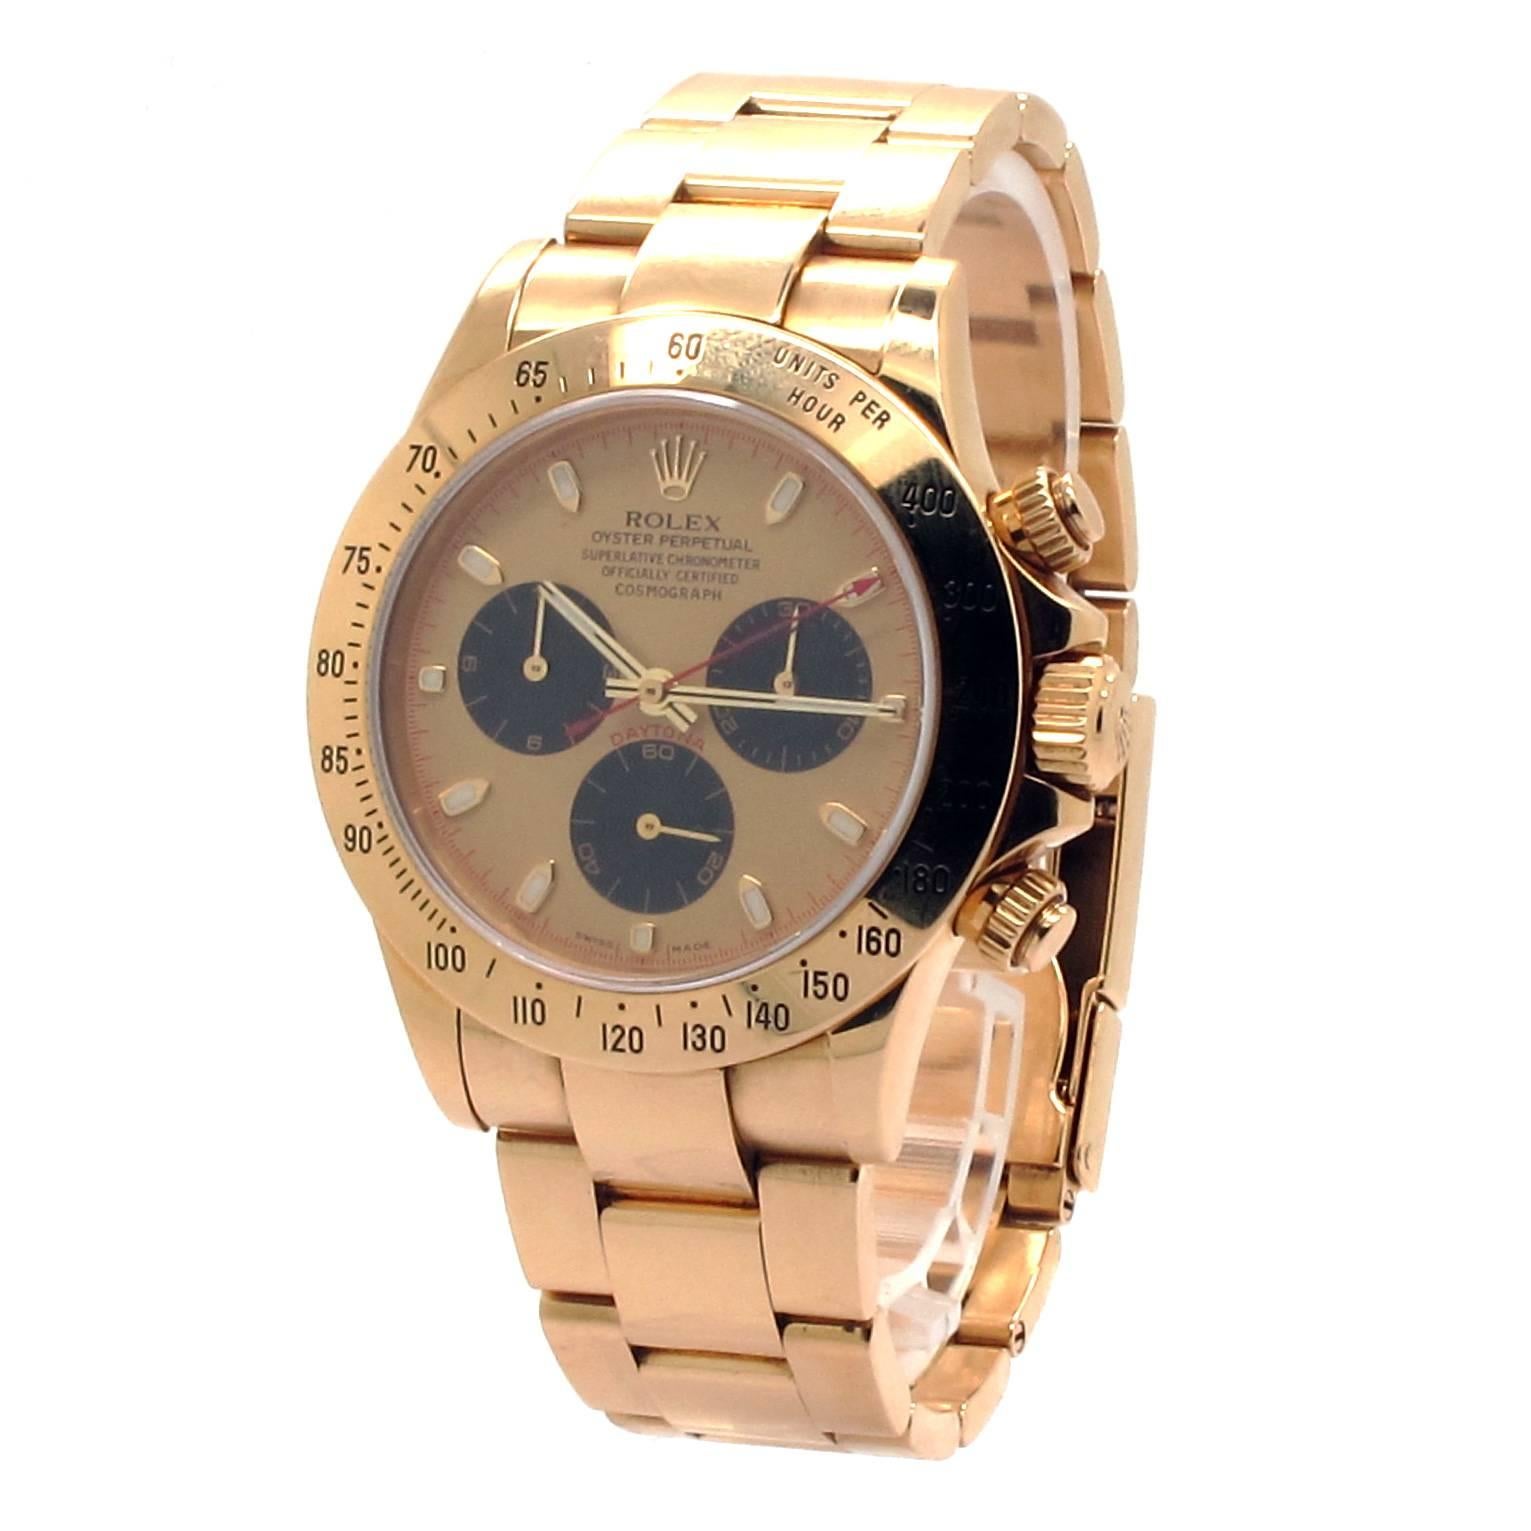 Rolex Daytona 18K Yellow Gold with Original Paul Newman champagne Cosmogrpah dial. Genuine Rolex 18K Gold Bracelet with Oyster Fliplock buckle. 40mm 18k Gold case, tachymeter engraved gold bezel, screw-down push buttons. 2000 model 7.25